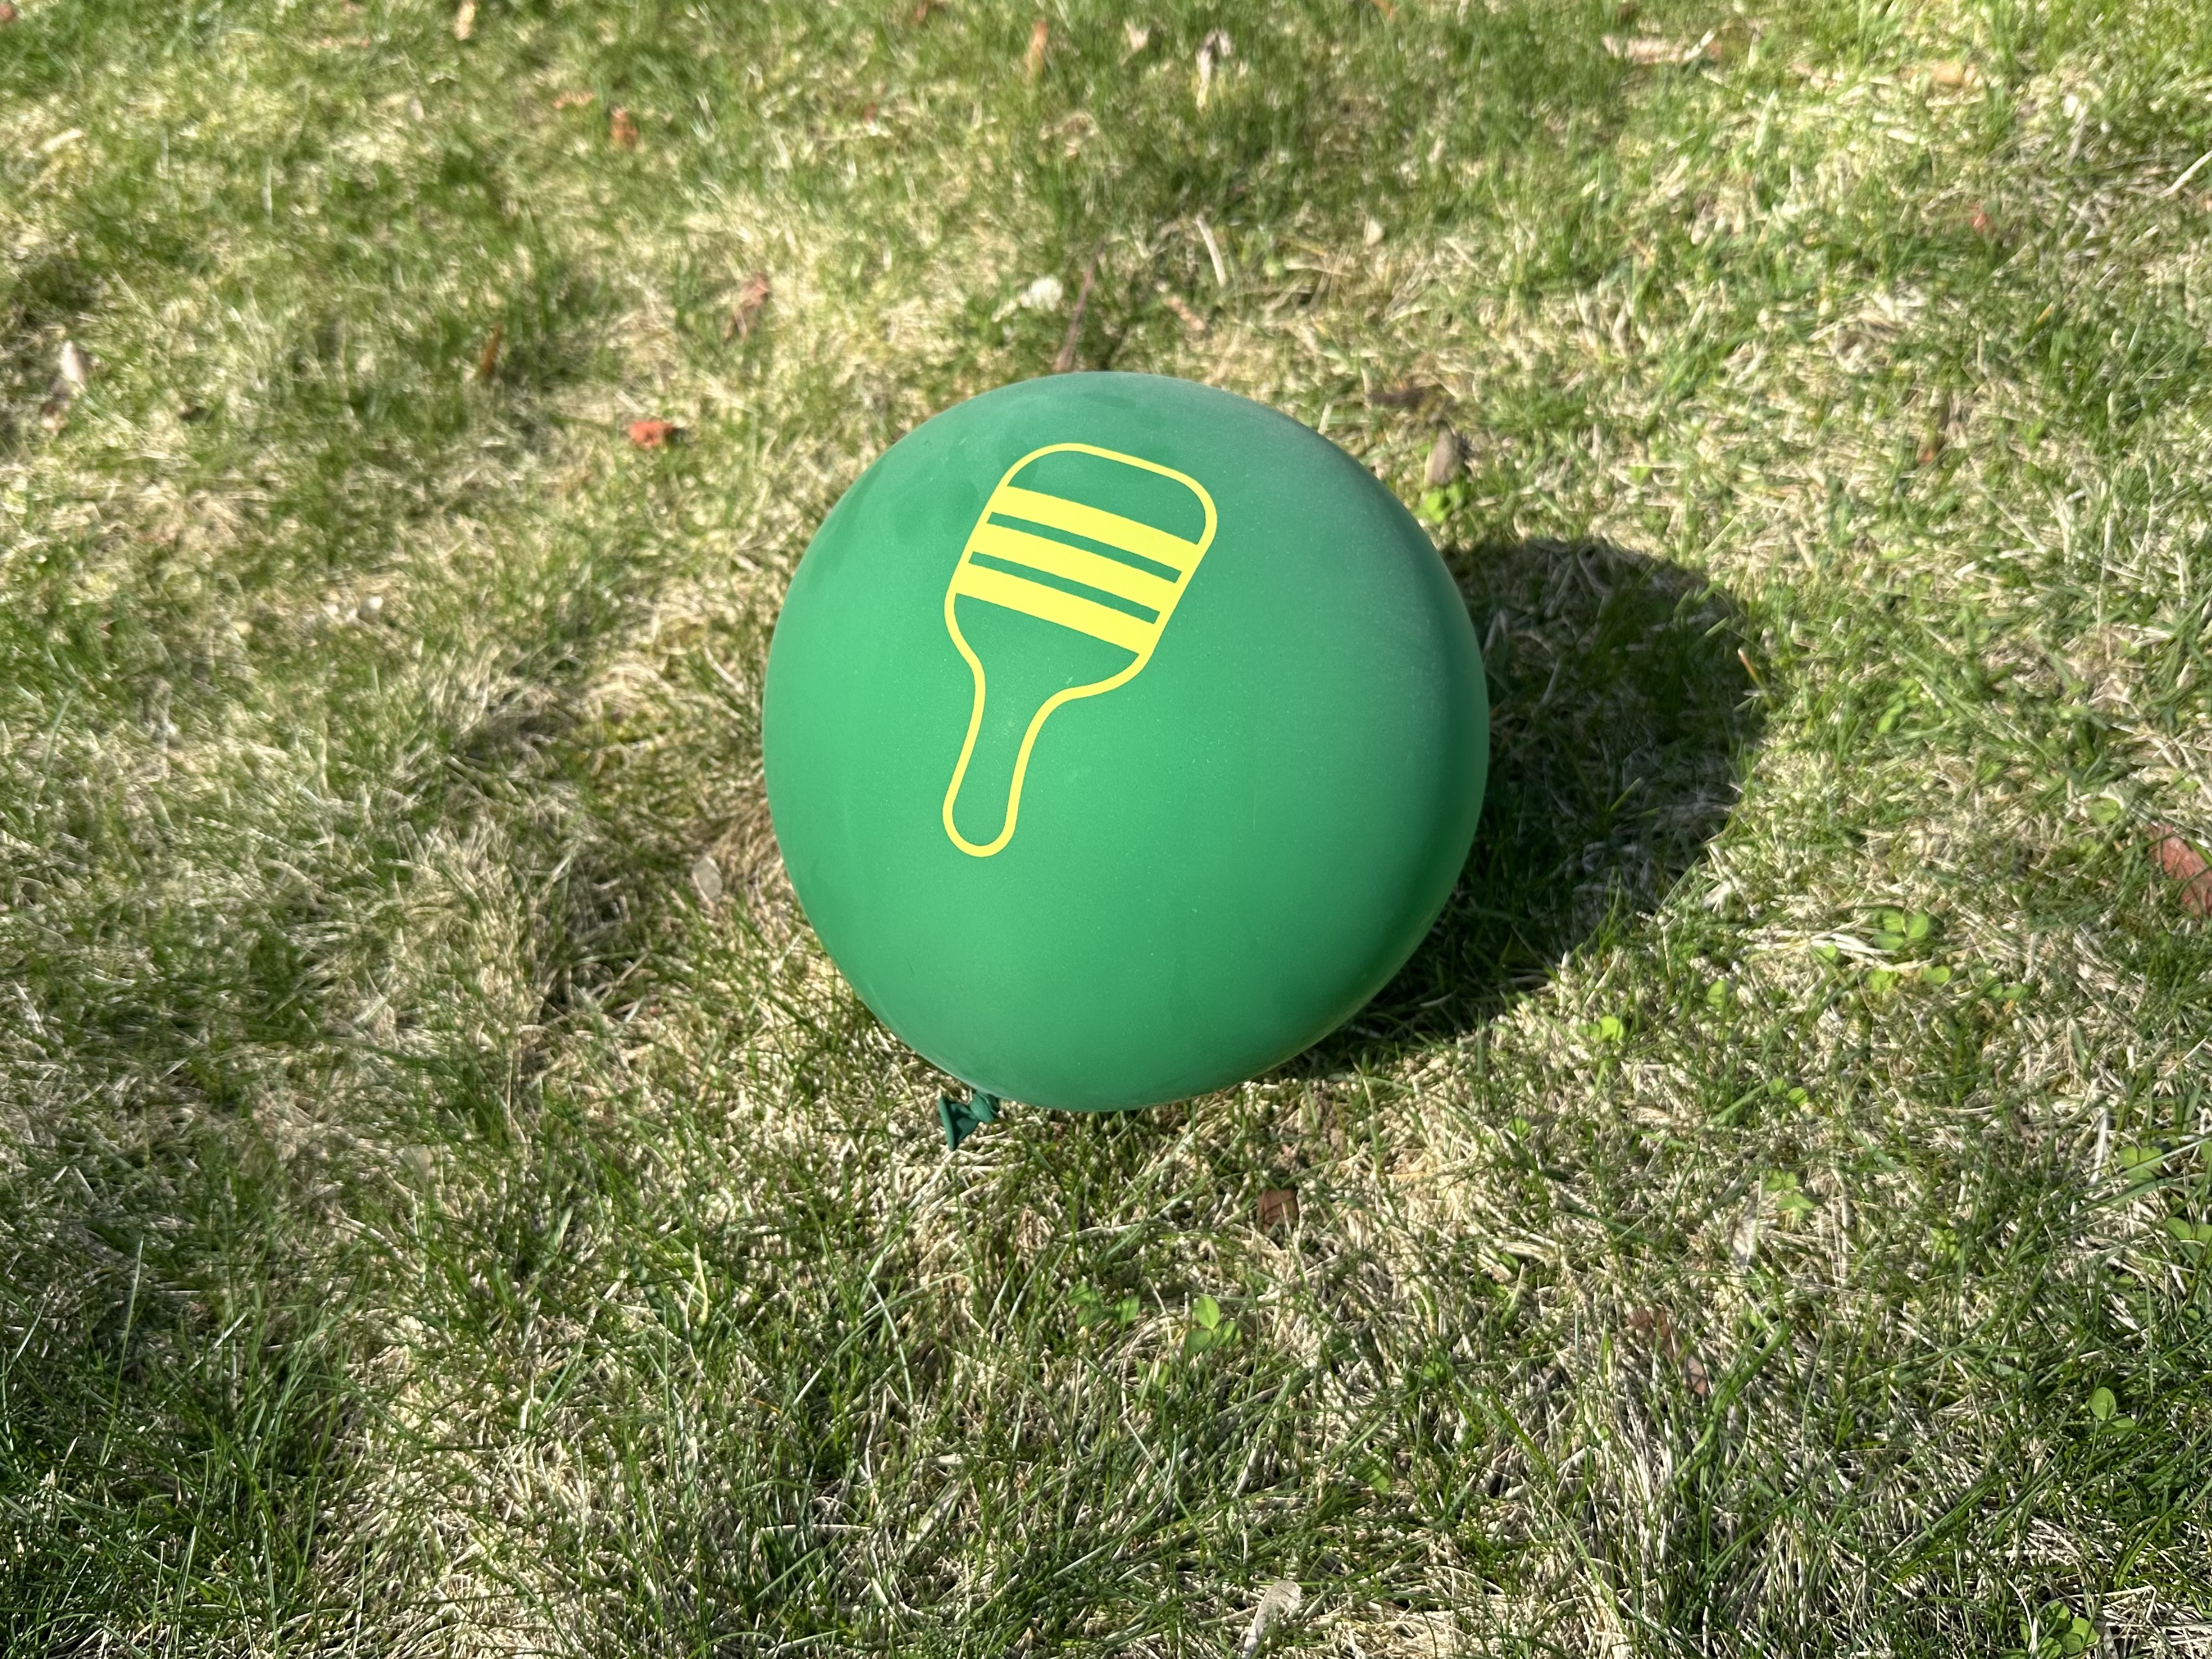 A green balloon with a yellow ice cream icon rests on grass, casting a shadow.